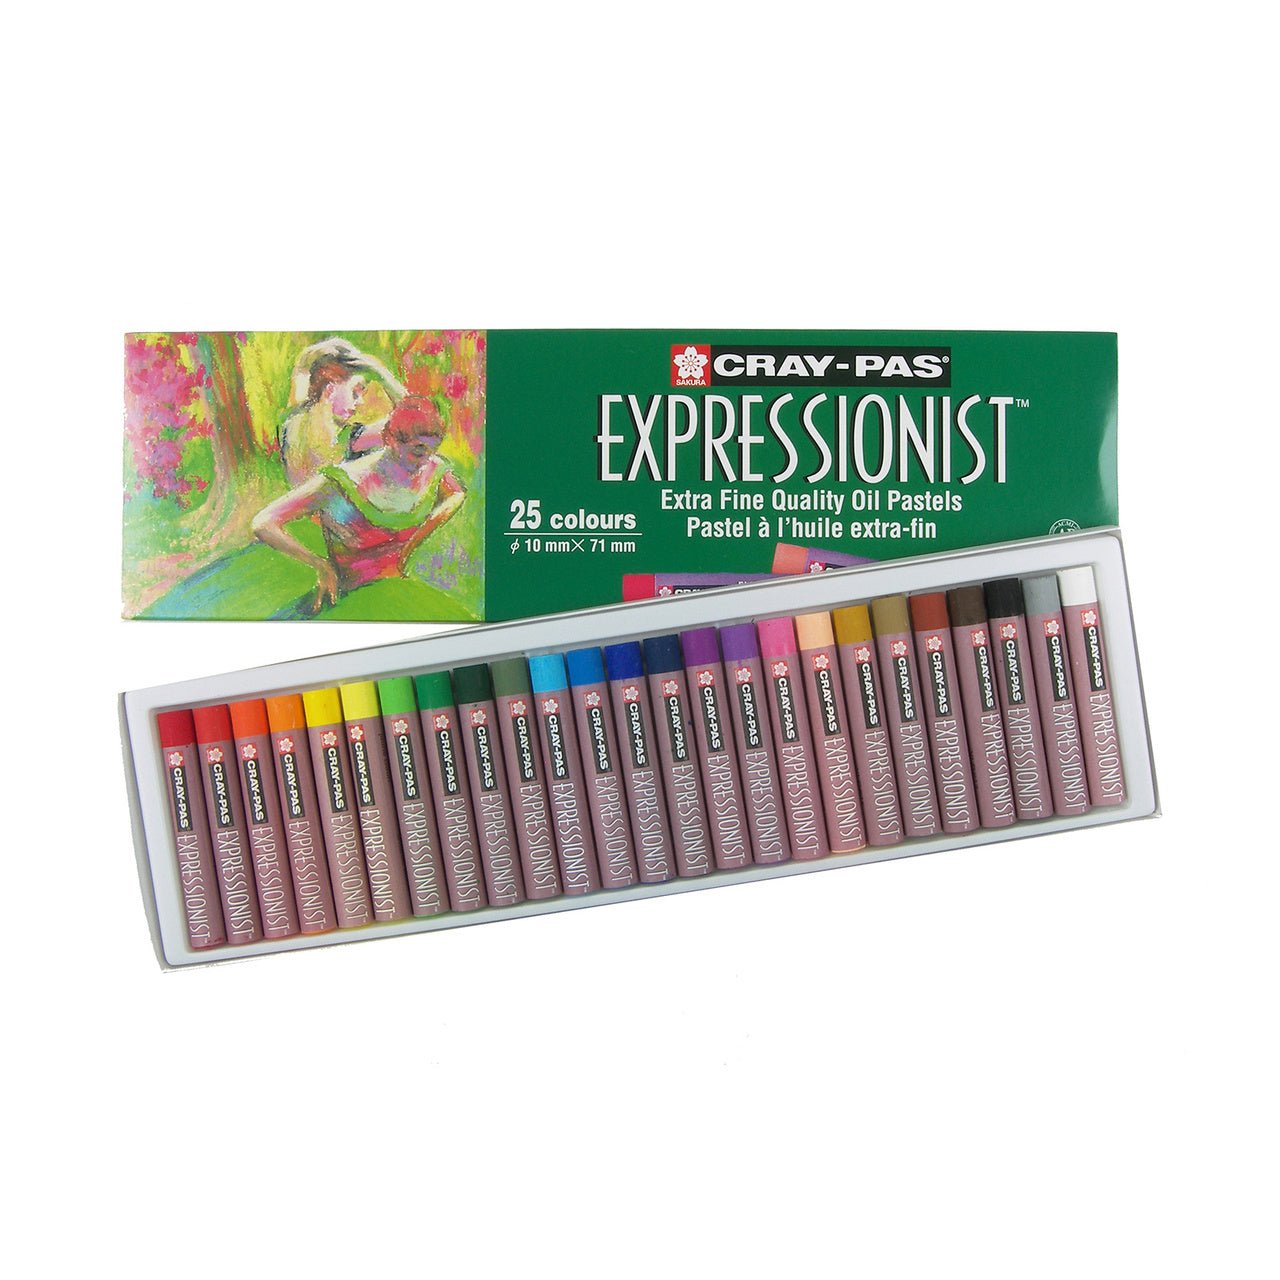 Cray-Pas Expressionist Oil Pastels set of 25 - merriartist.com